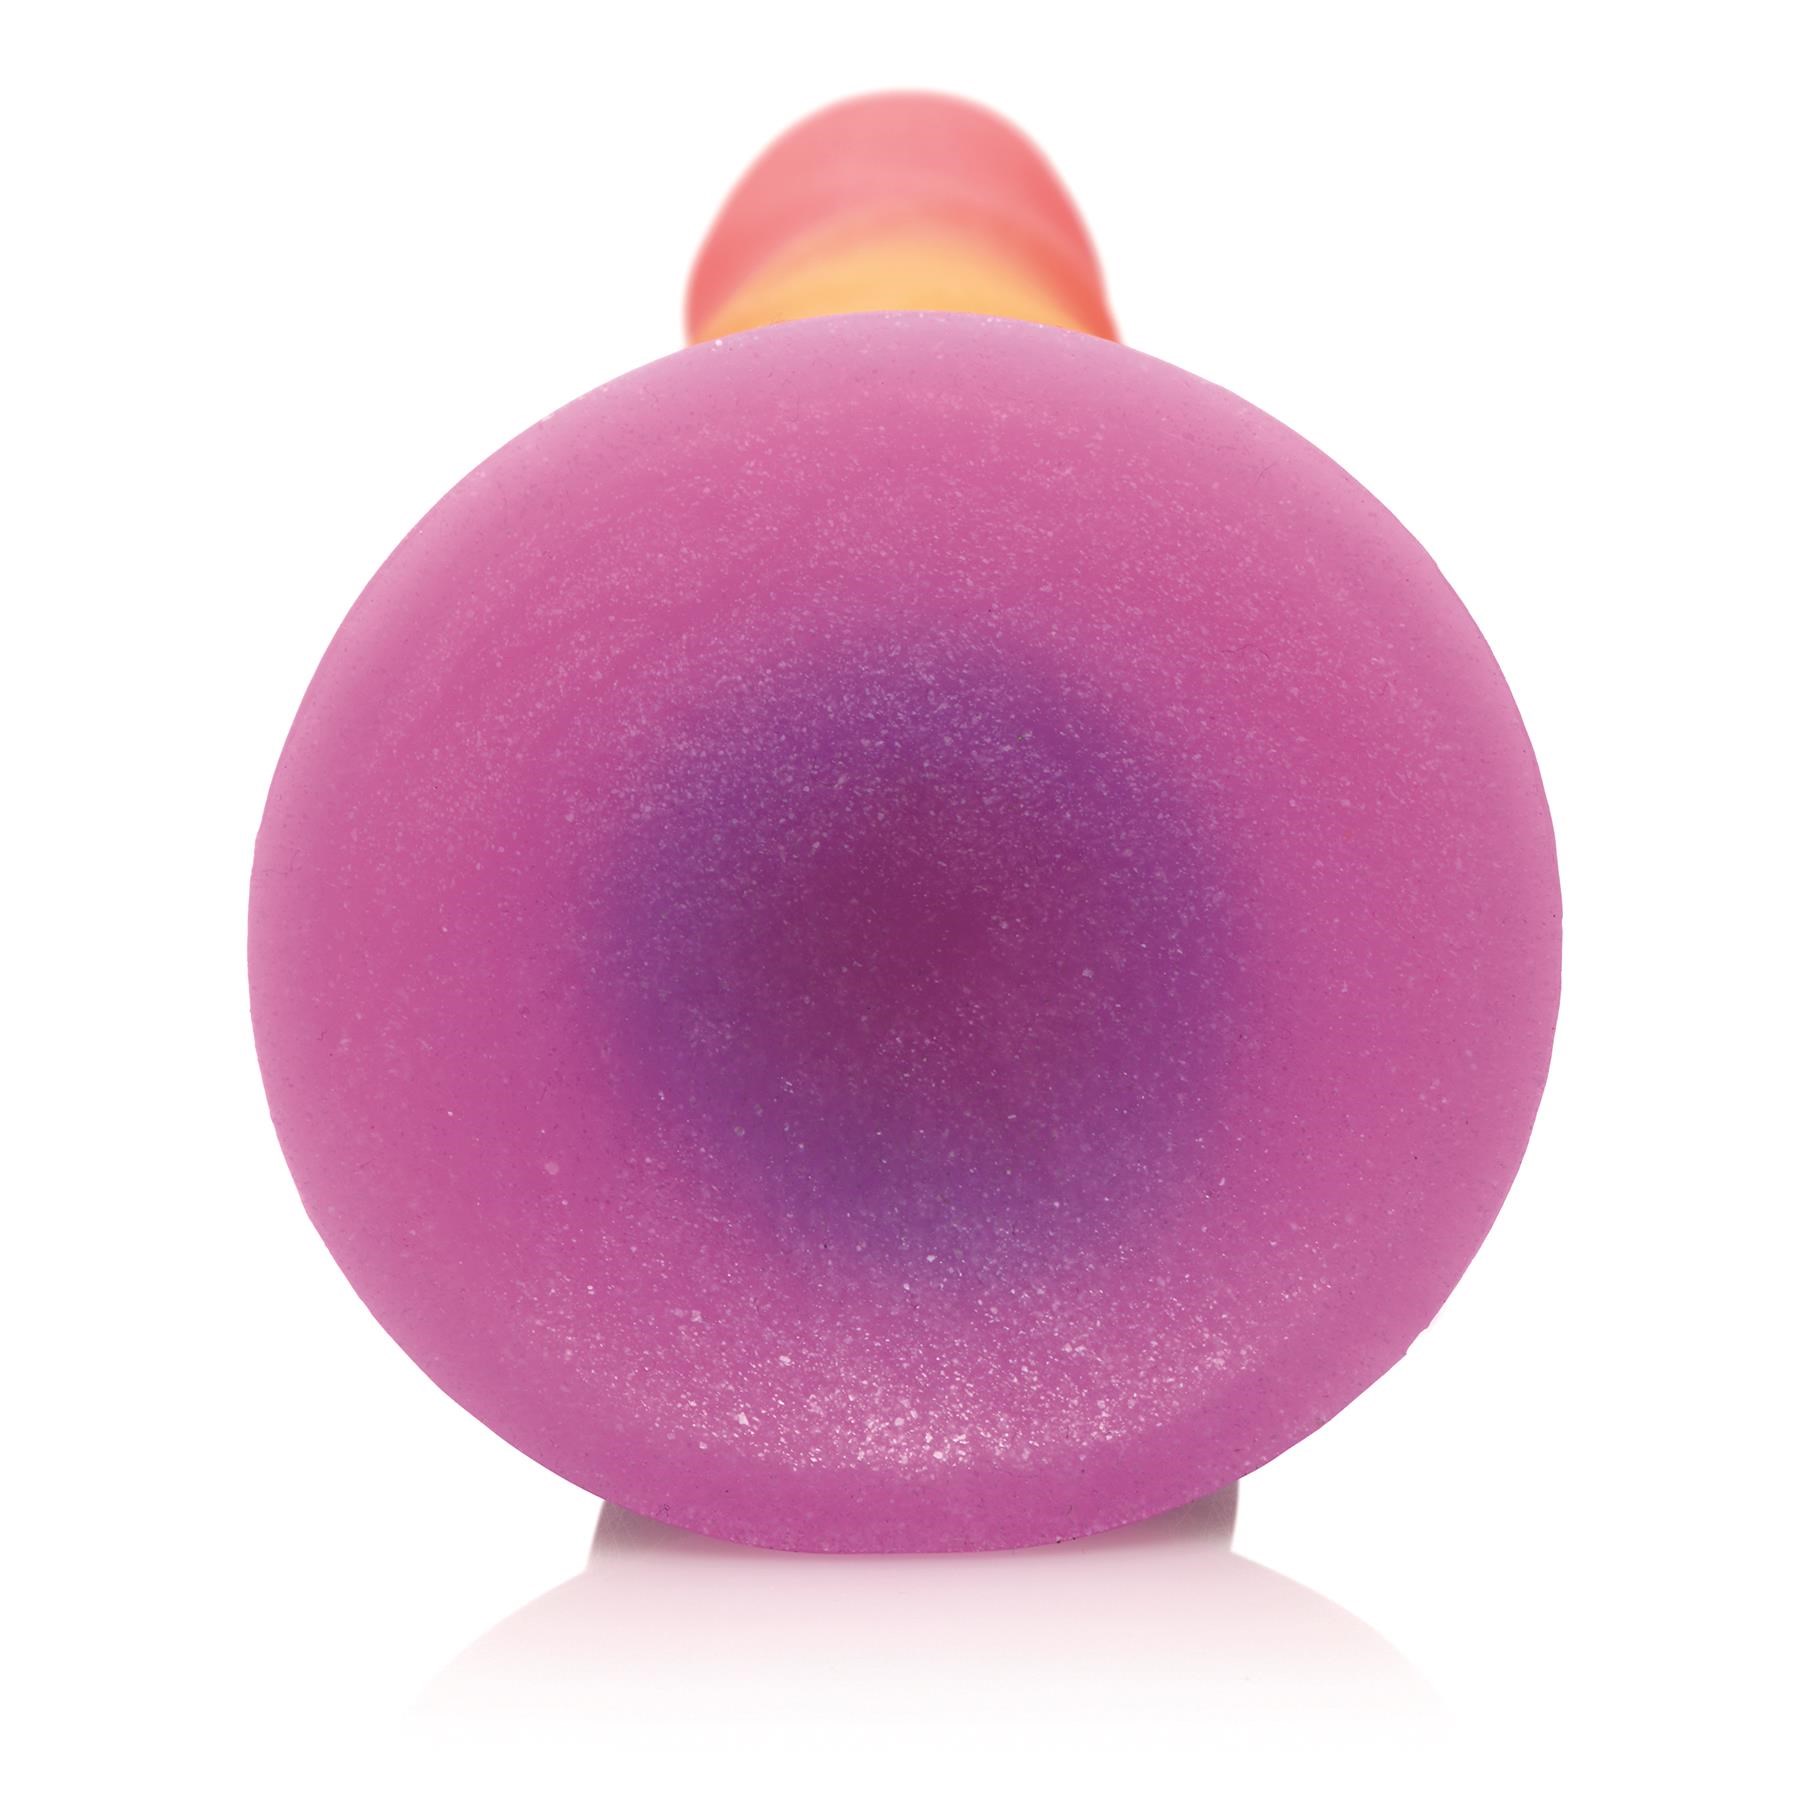 Simply Sweet Zigzag Rainbow Dildo - Product Shot #5 - Showing Suction Cup